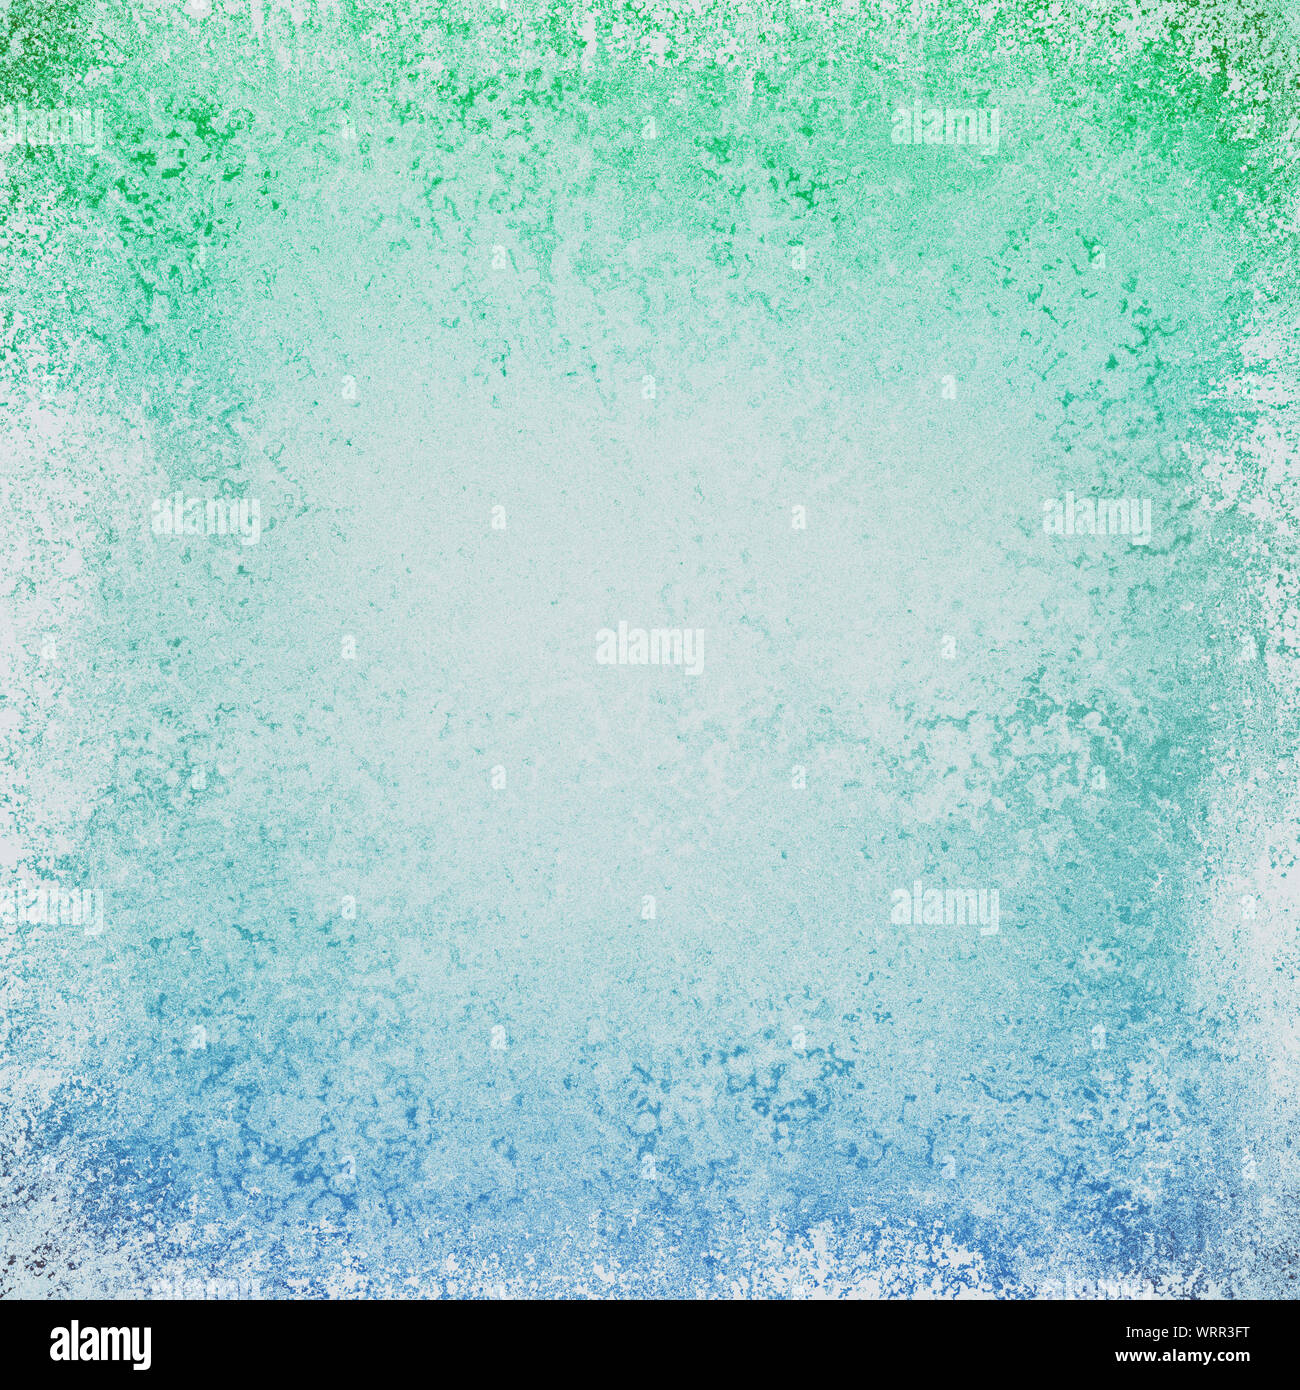 Blue green background with white grunge texture on borders, abstract messy beachy design colors Stock Photo